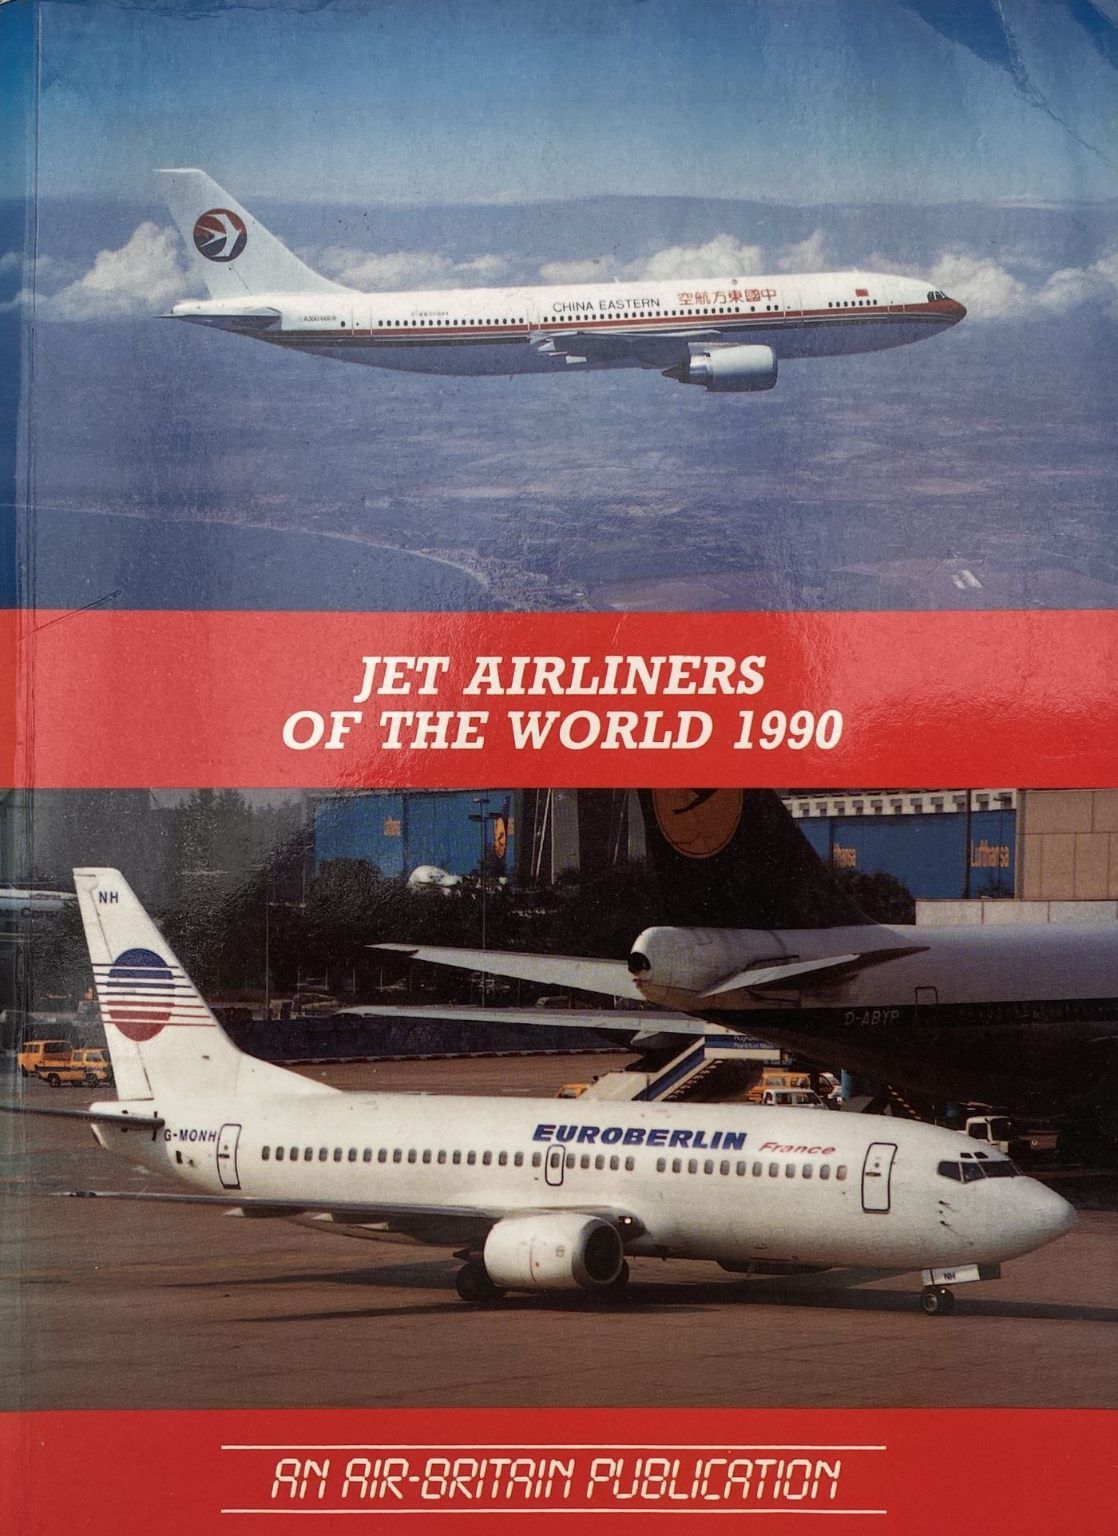 Jet Airliners of the World 1990